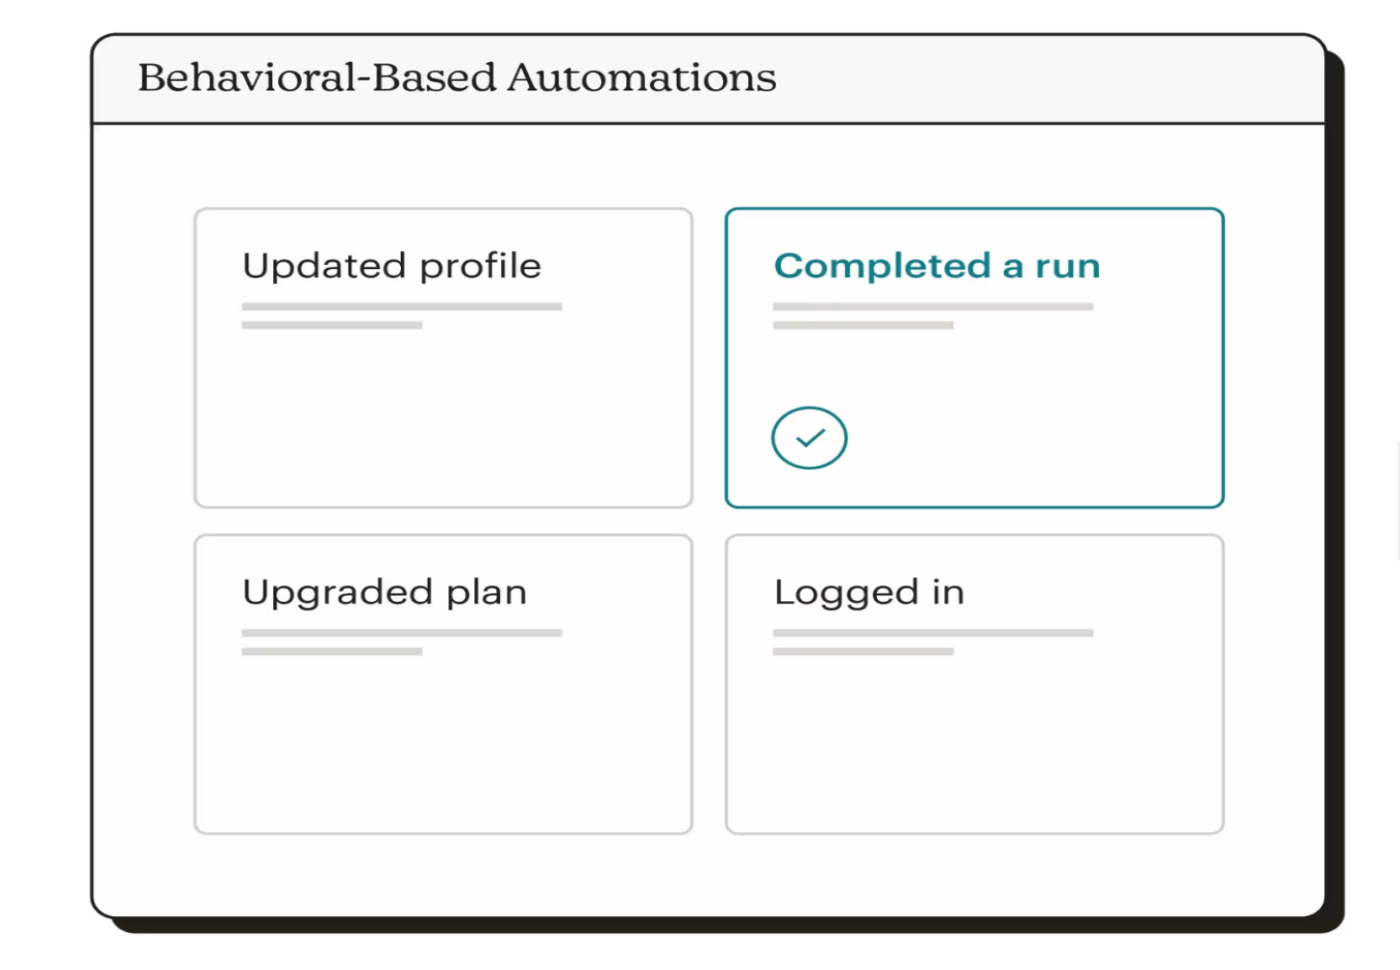 Mailchimp behavior-based automations page.